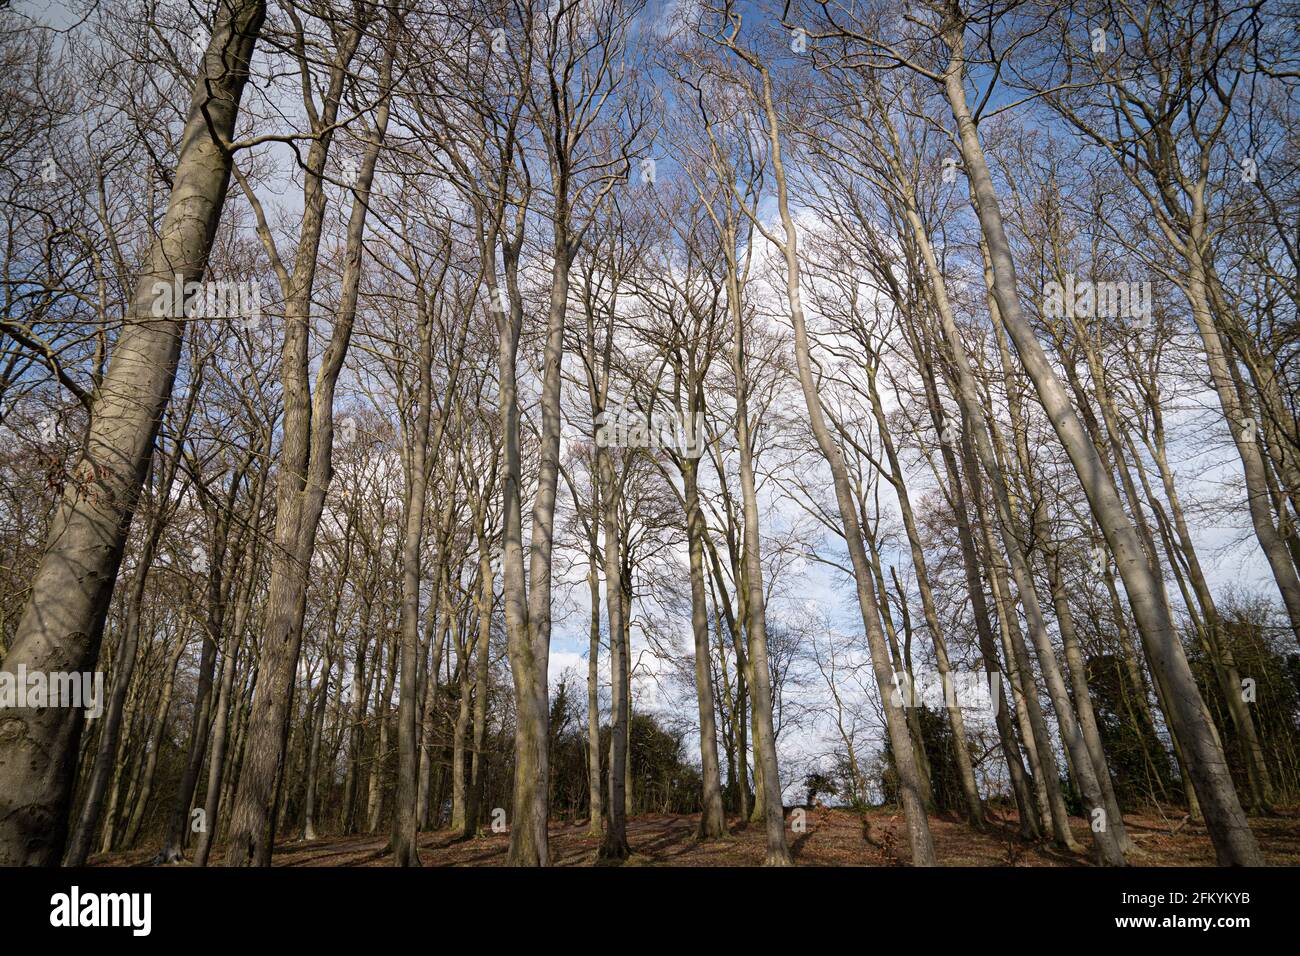 View through beech tree forest against blue sky for natural layer nature texture backdrop wallpaper showing tree truck, branches and twigs Silhouetted Stock Photo